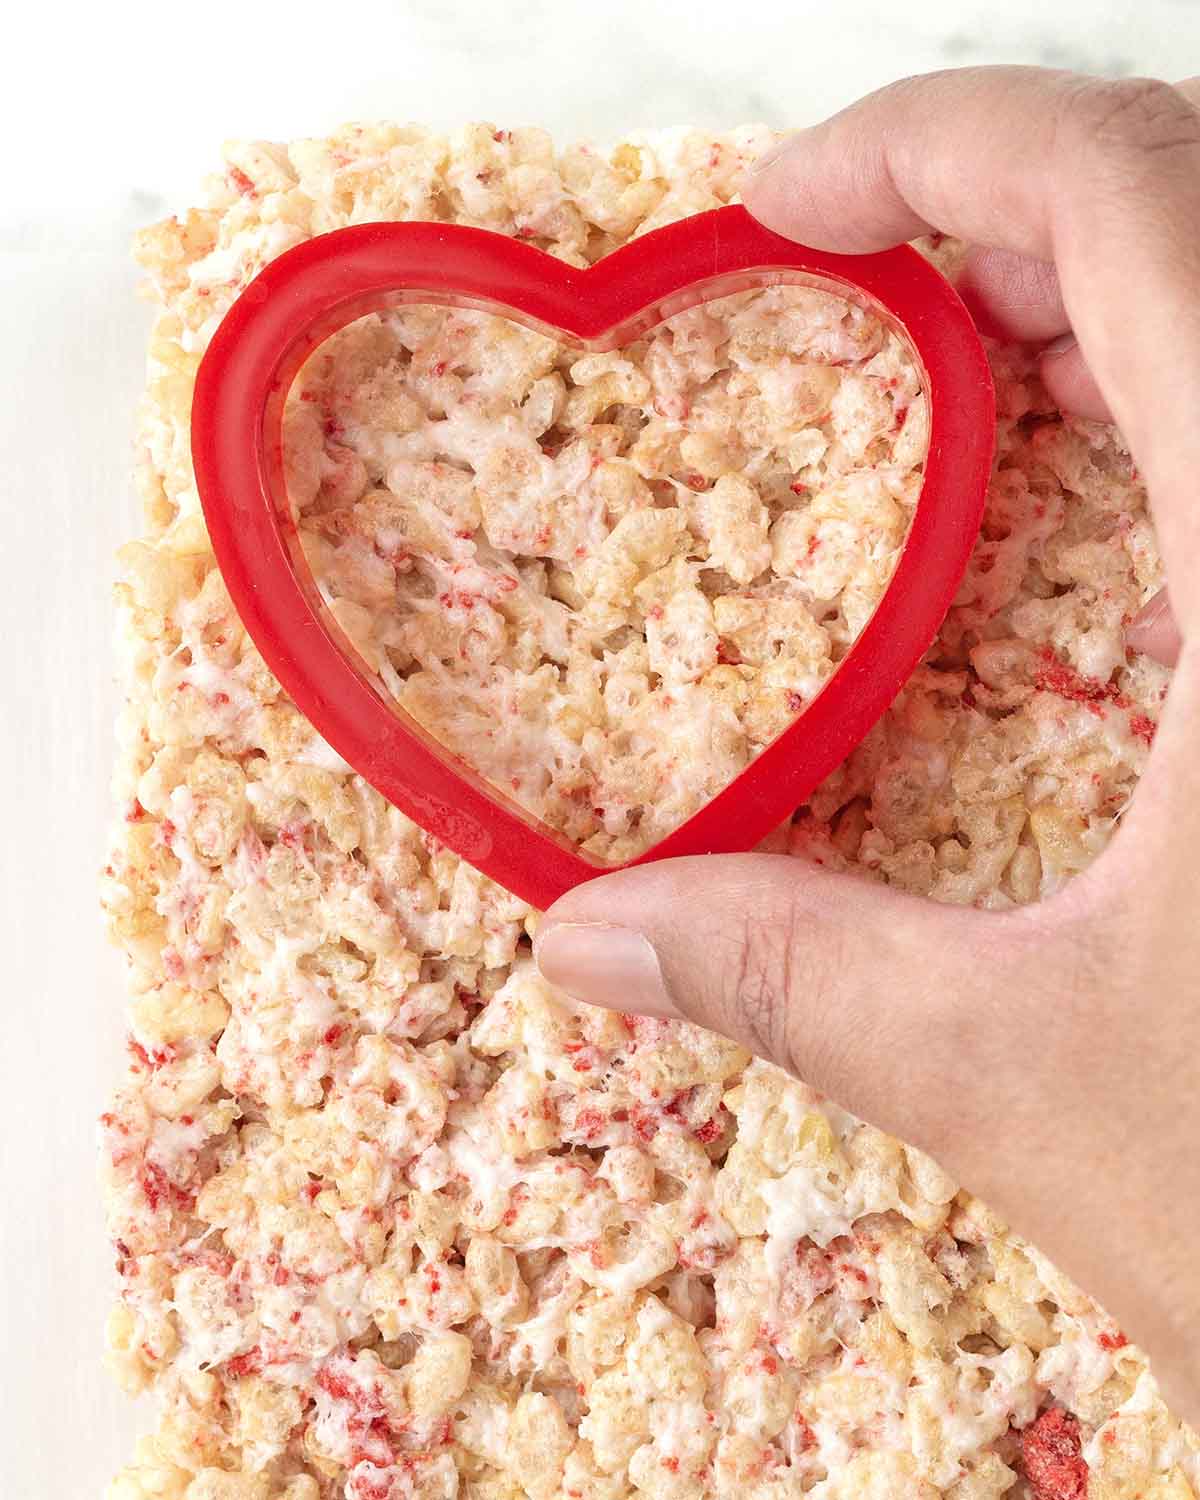 A hand pressing a heart shaped cutter into a square of rice crispy treats.